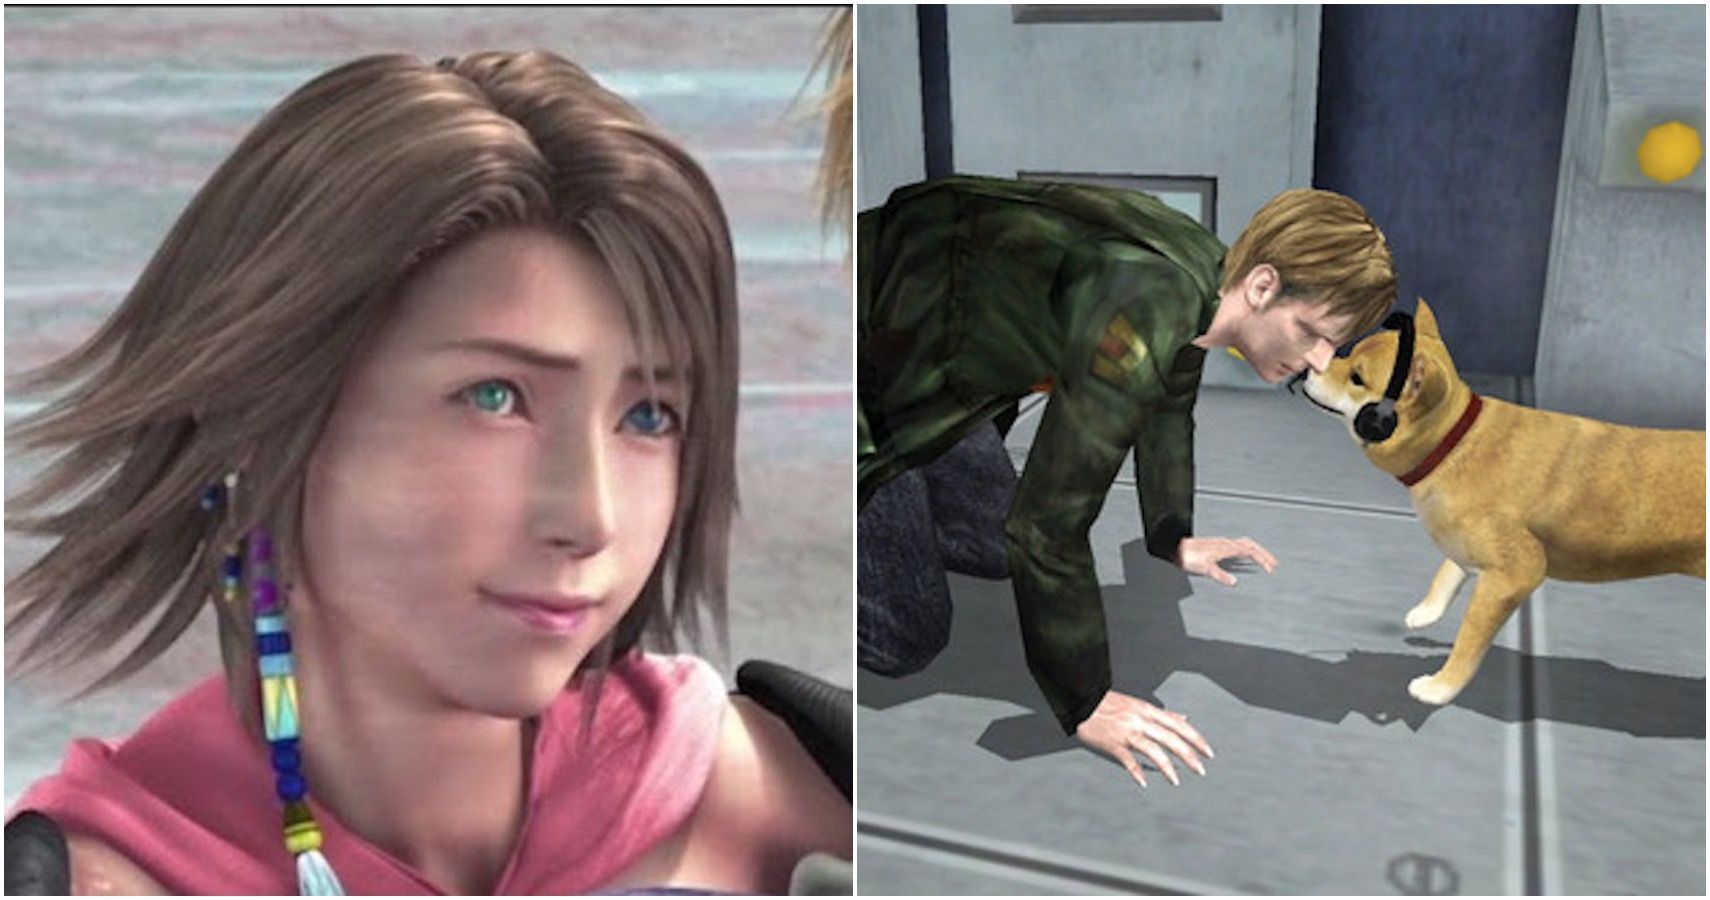 Final fantasy x-2 and silent hill 2